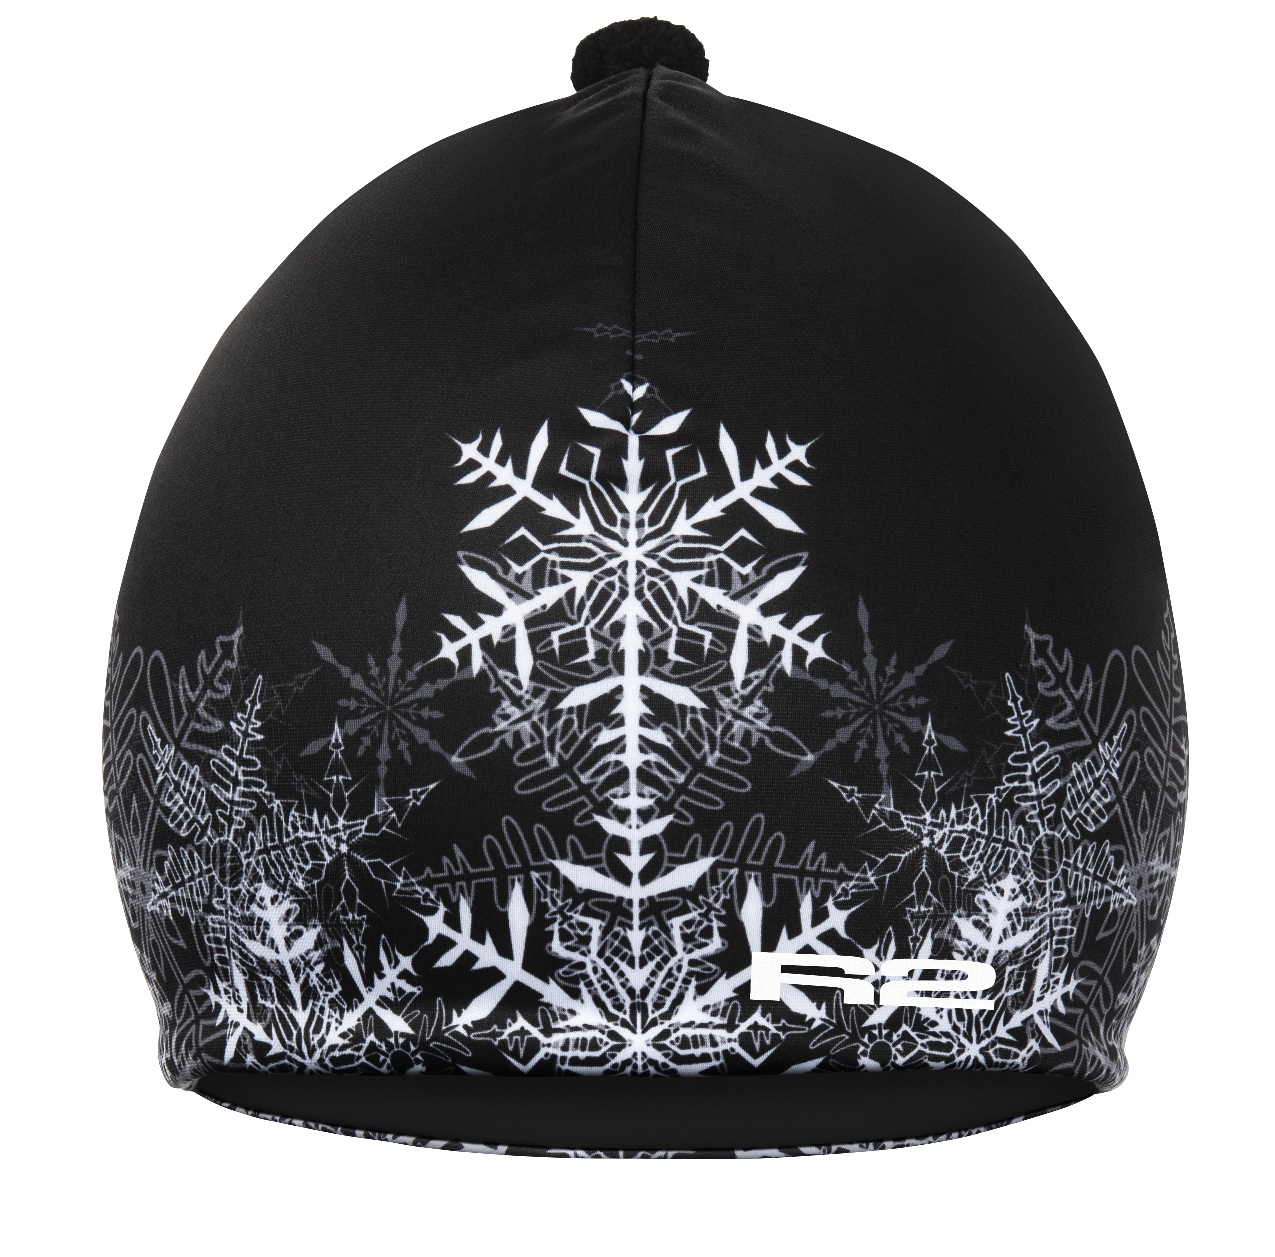 SPORTS FUNCTIONAL HAT R2 ICY ATK10A M